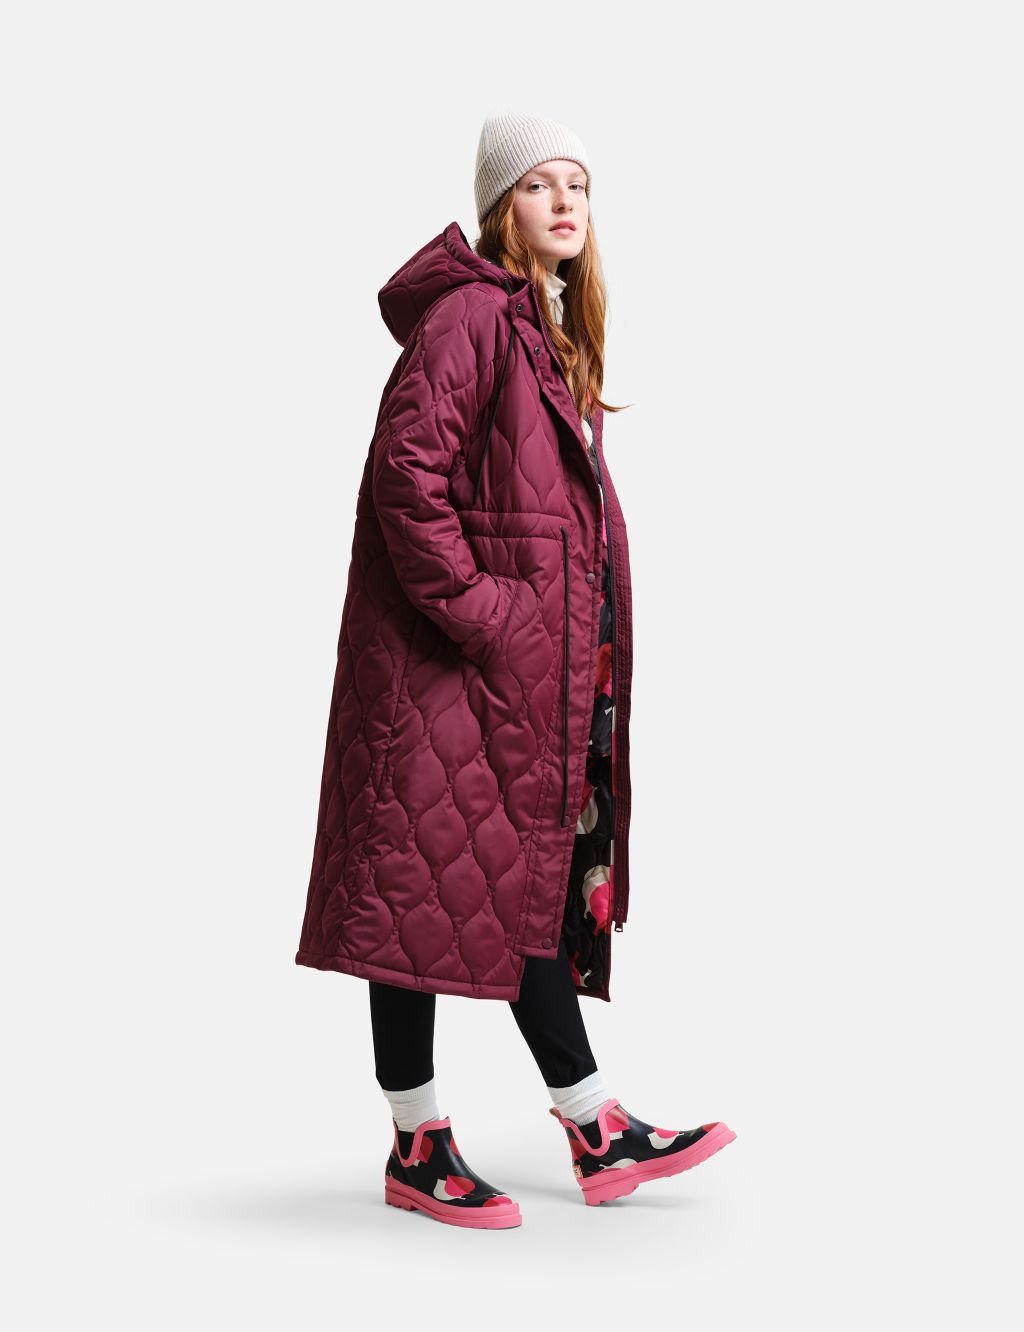 Orla Kiely Quilted Water-Repellent Longline Coat image 4